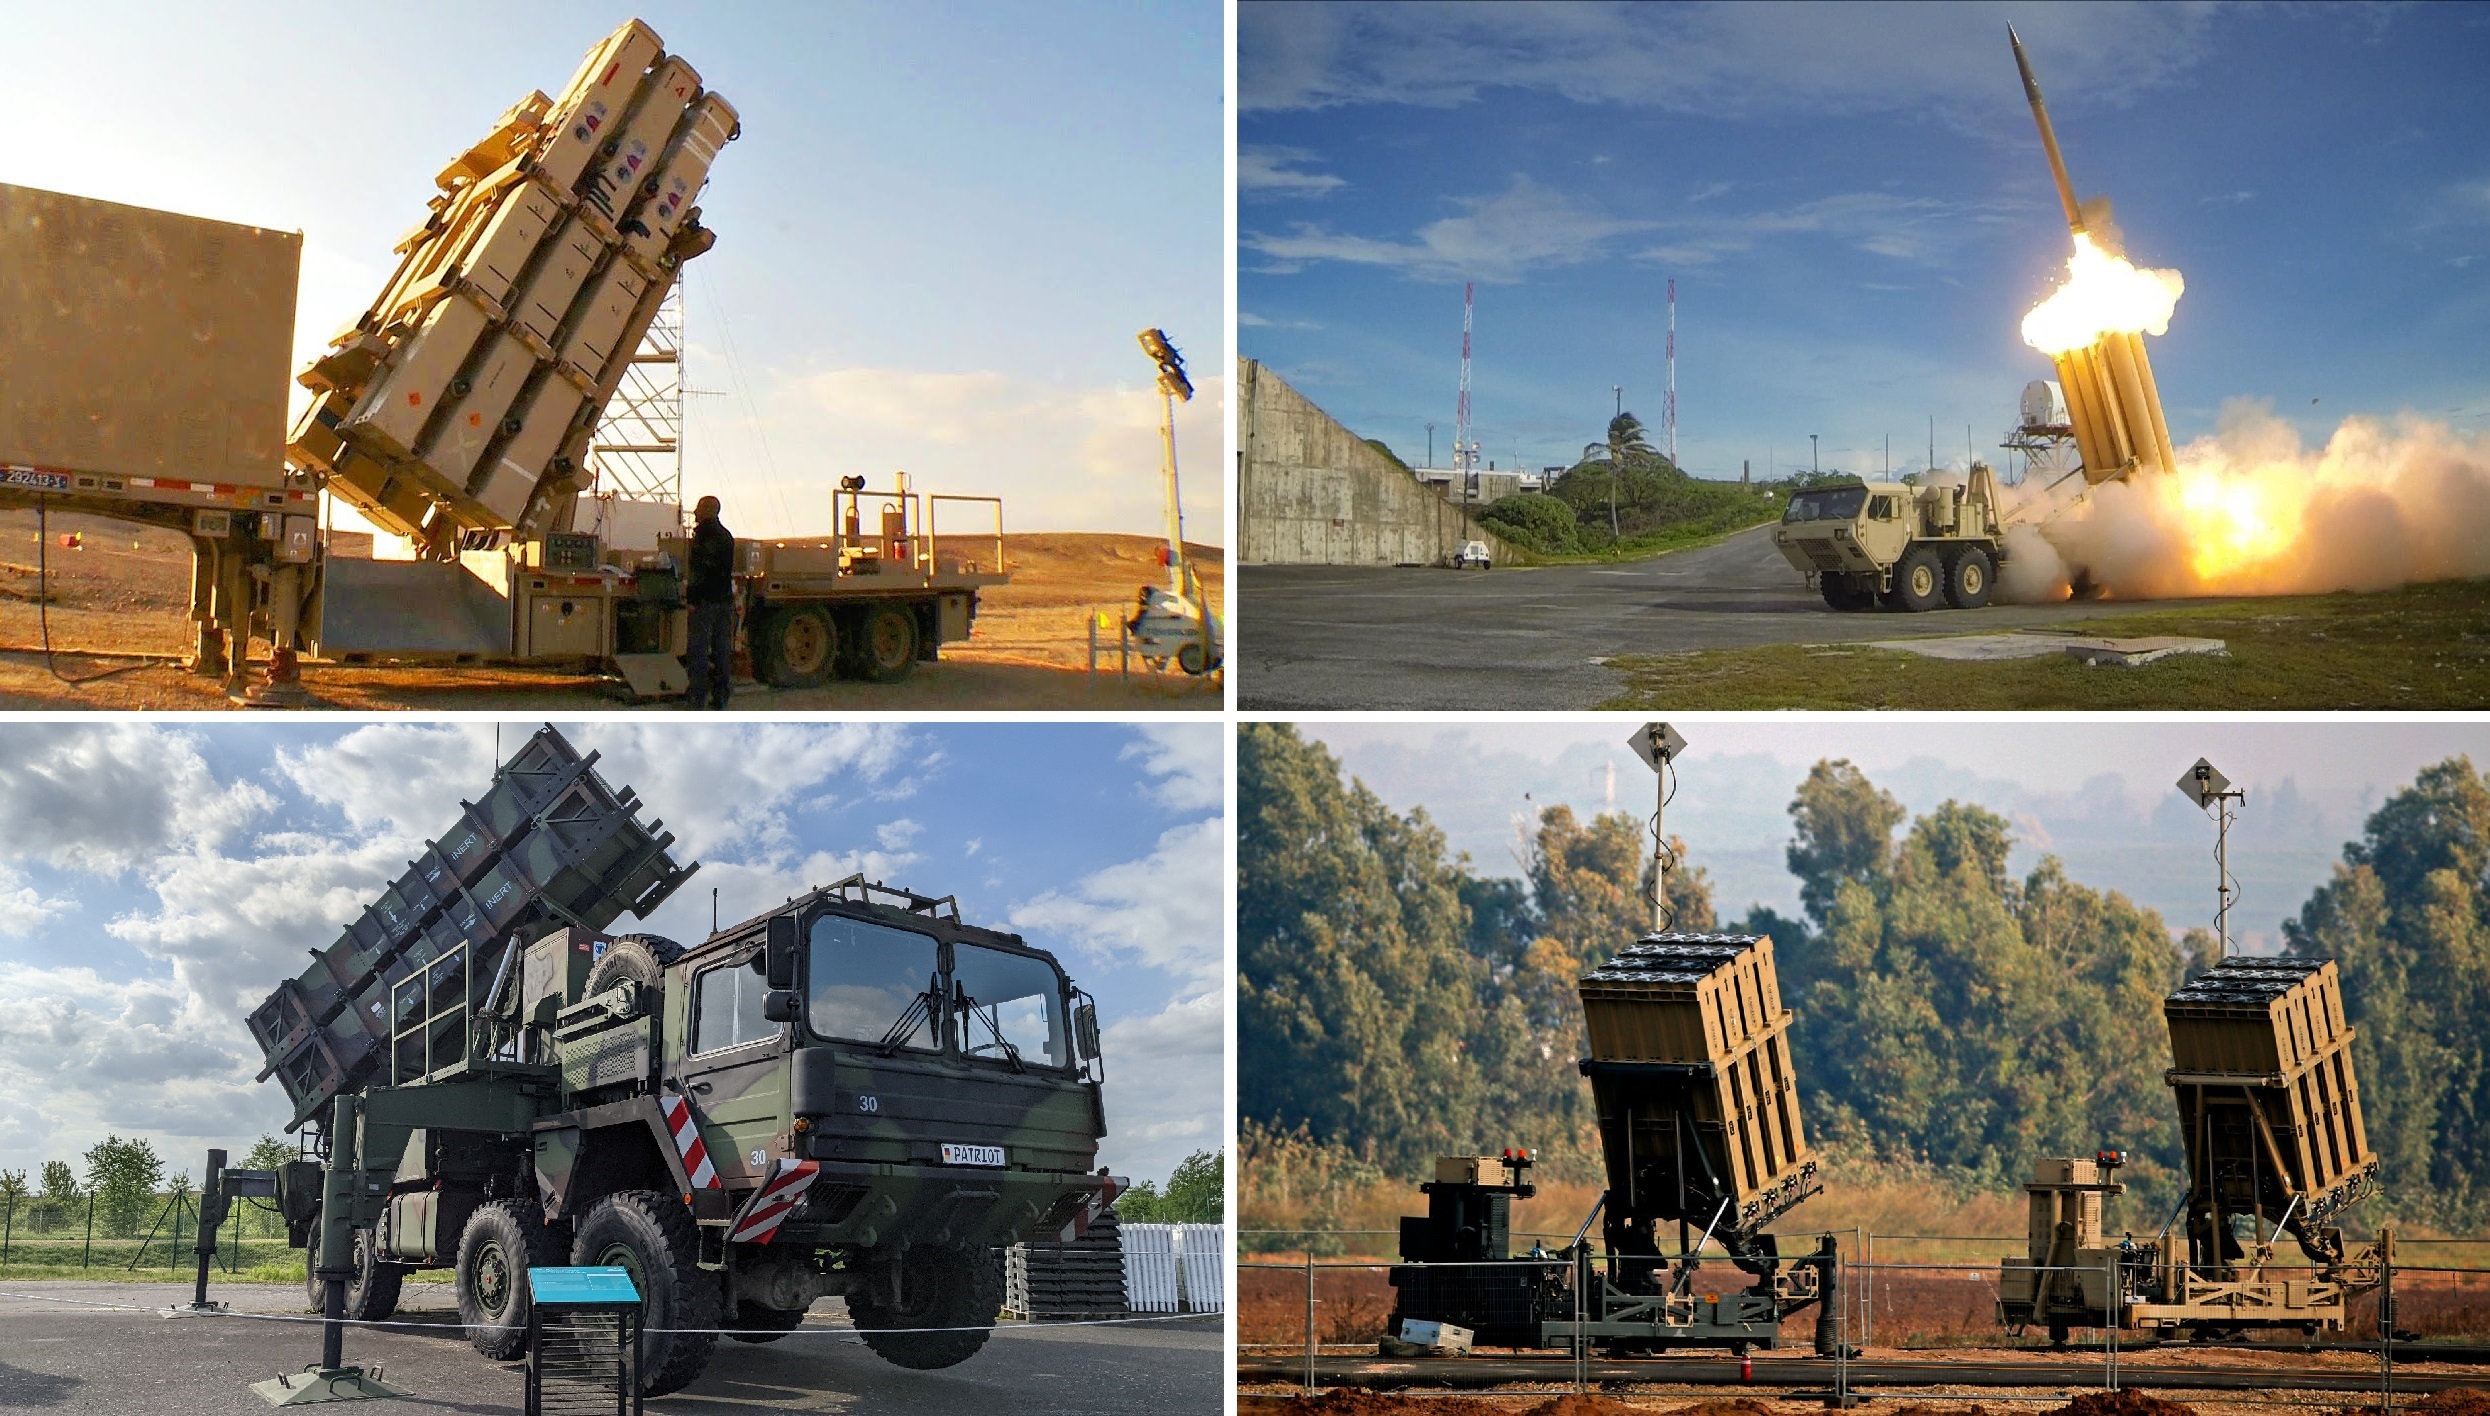 Israel and the U.S. conducted large-scale exercises involving air defense systems THAAD, Patriot, Aegis, Iron Dome, Hetz and David's Sling, but there is a nuance